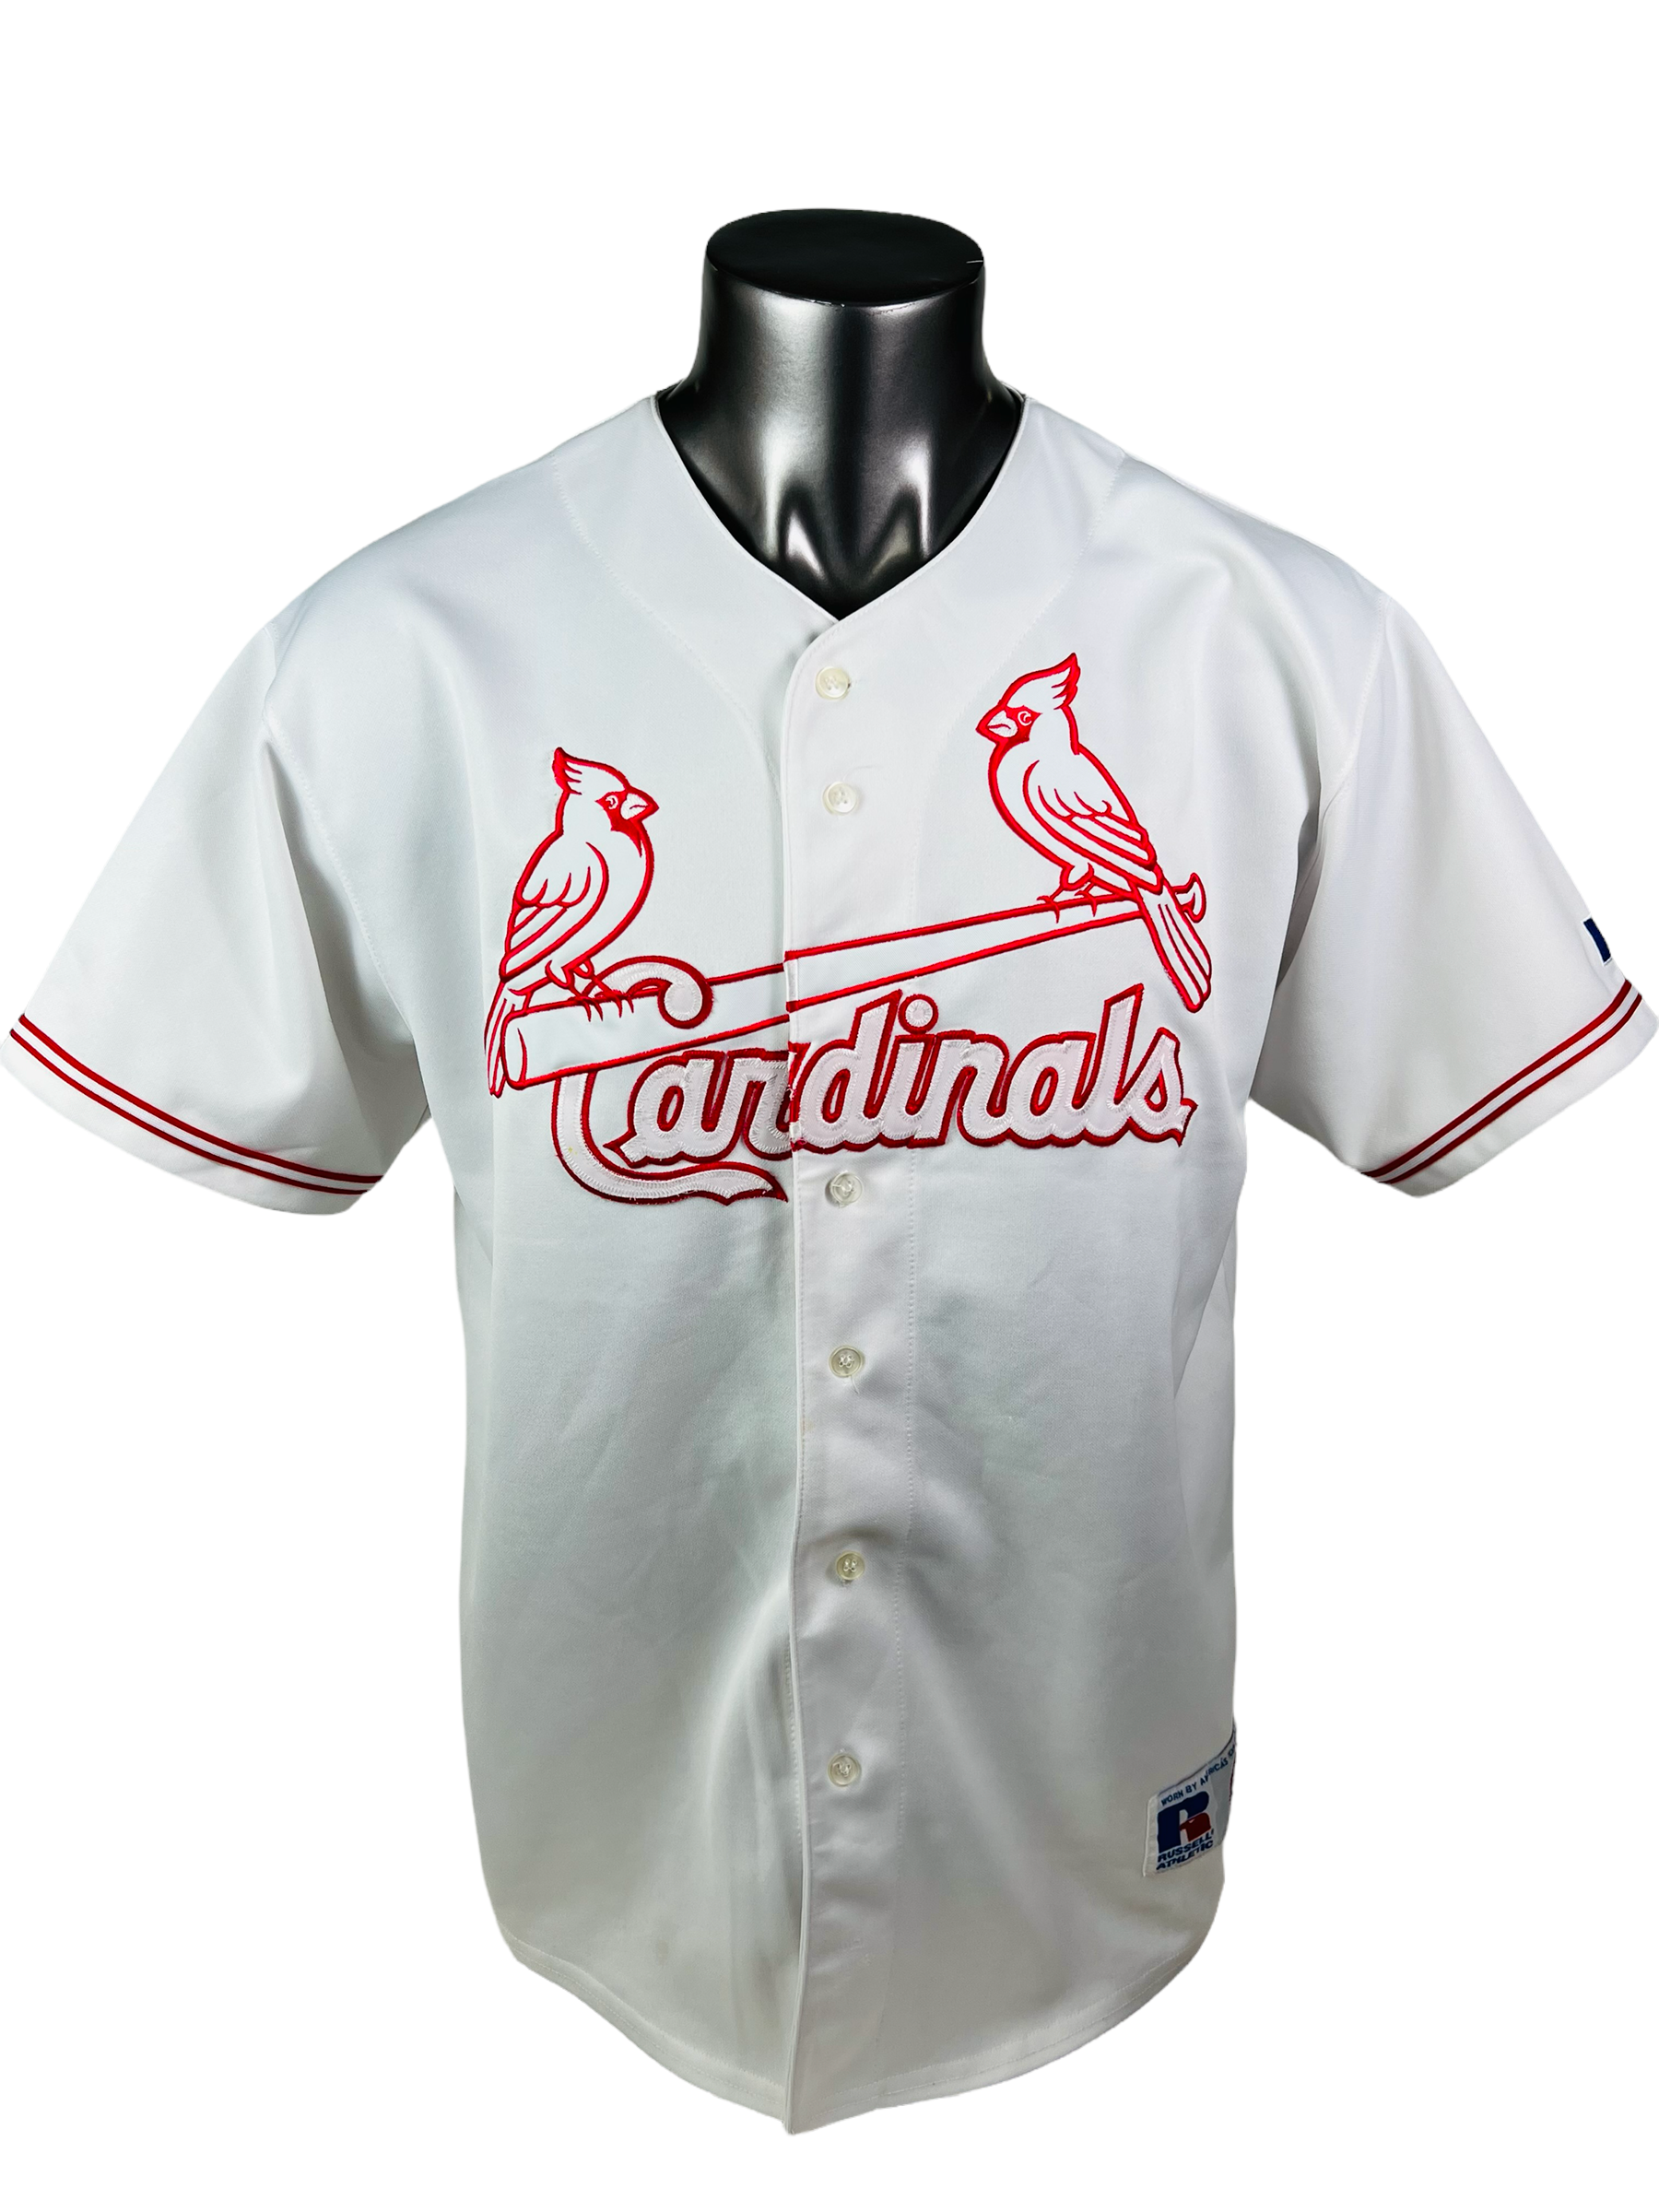 ST. LOUIS CARDINALS VINTAGE 1990'S RUSSELL ATHLETIC JERSEY ADULT